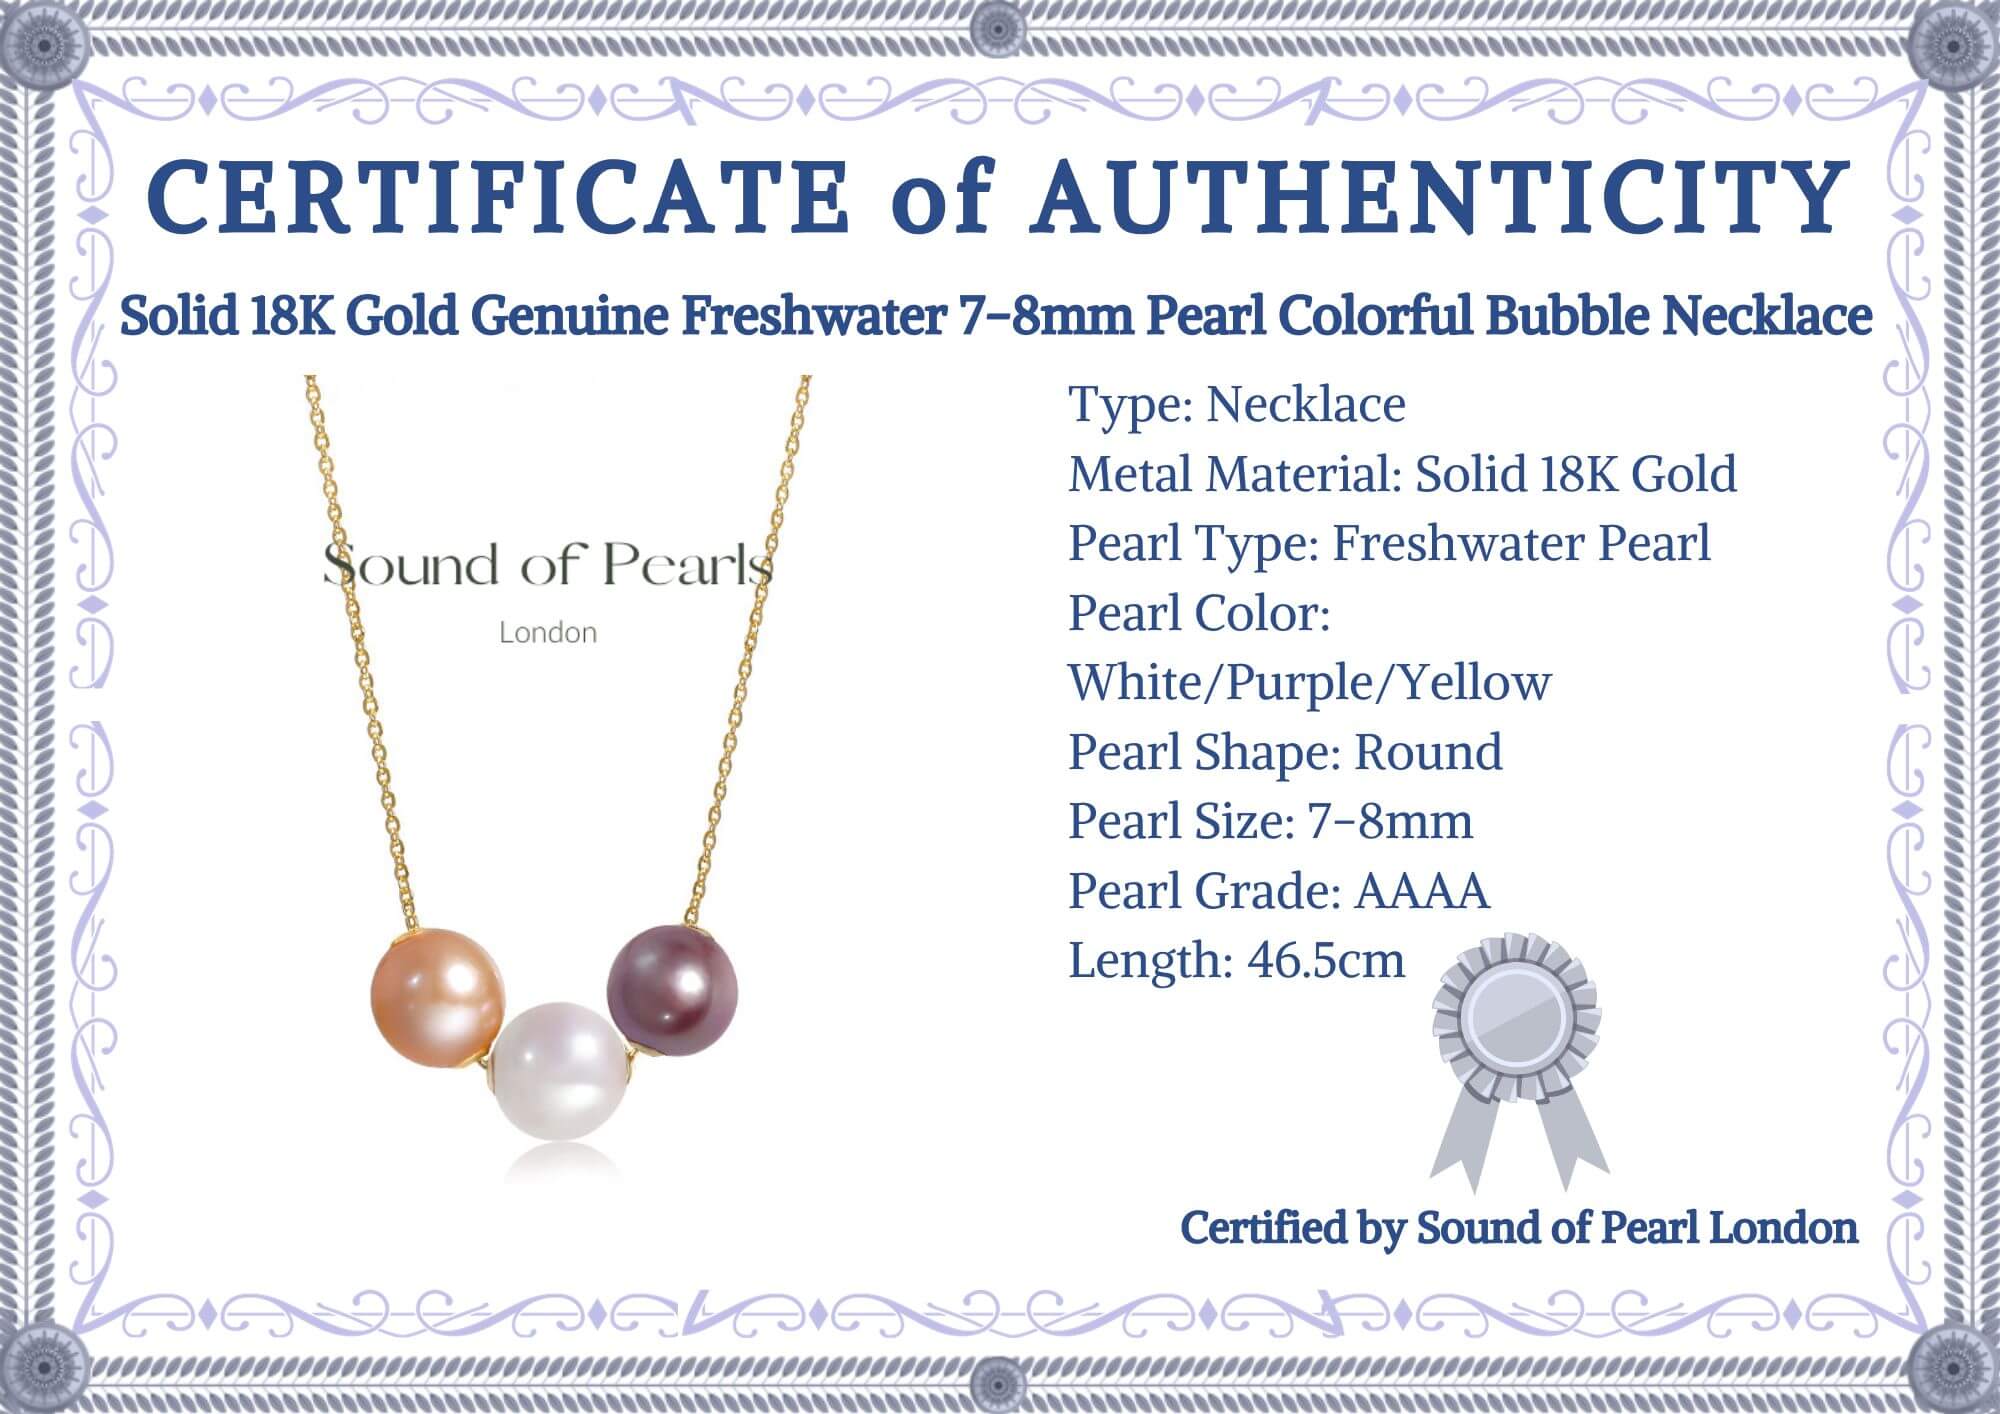 Solid 18K Gold Genuine Freshwater 7-8mm Pearl Colorful Bubble Necklace